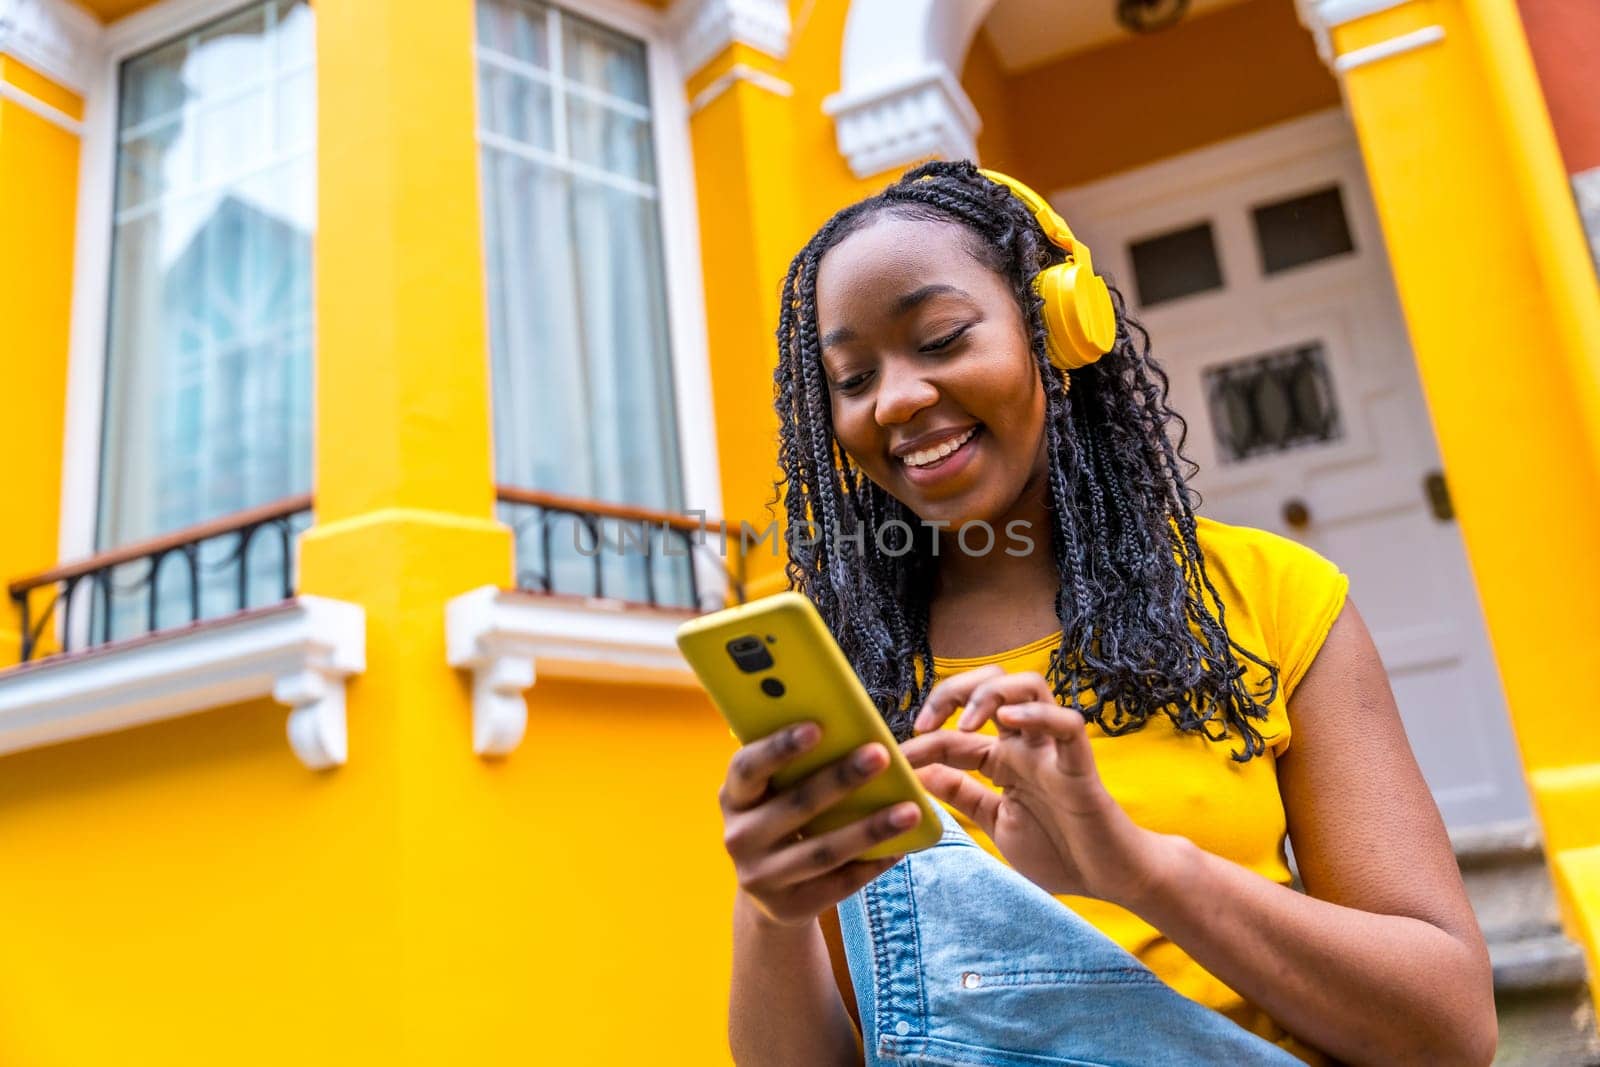 African woman using phone while listening to music standing outside a colorful yellow house